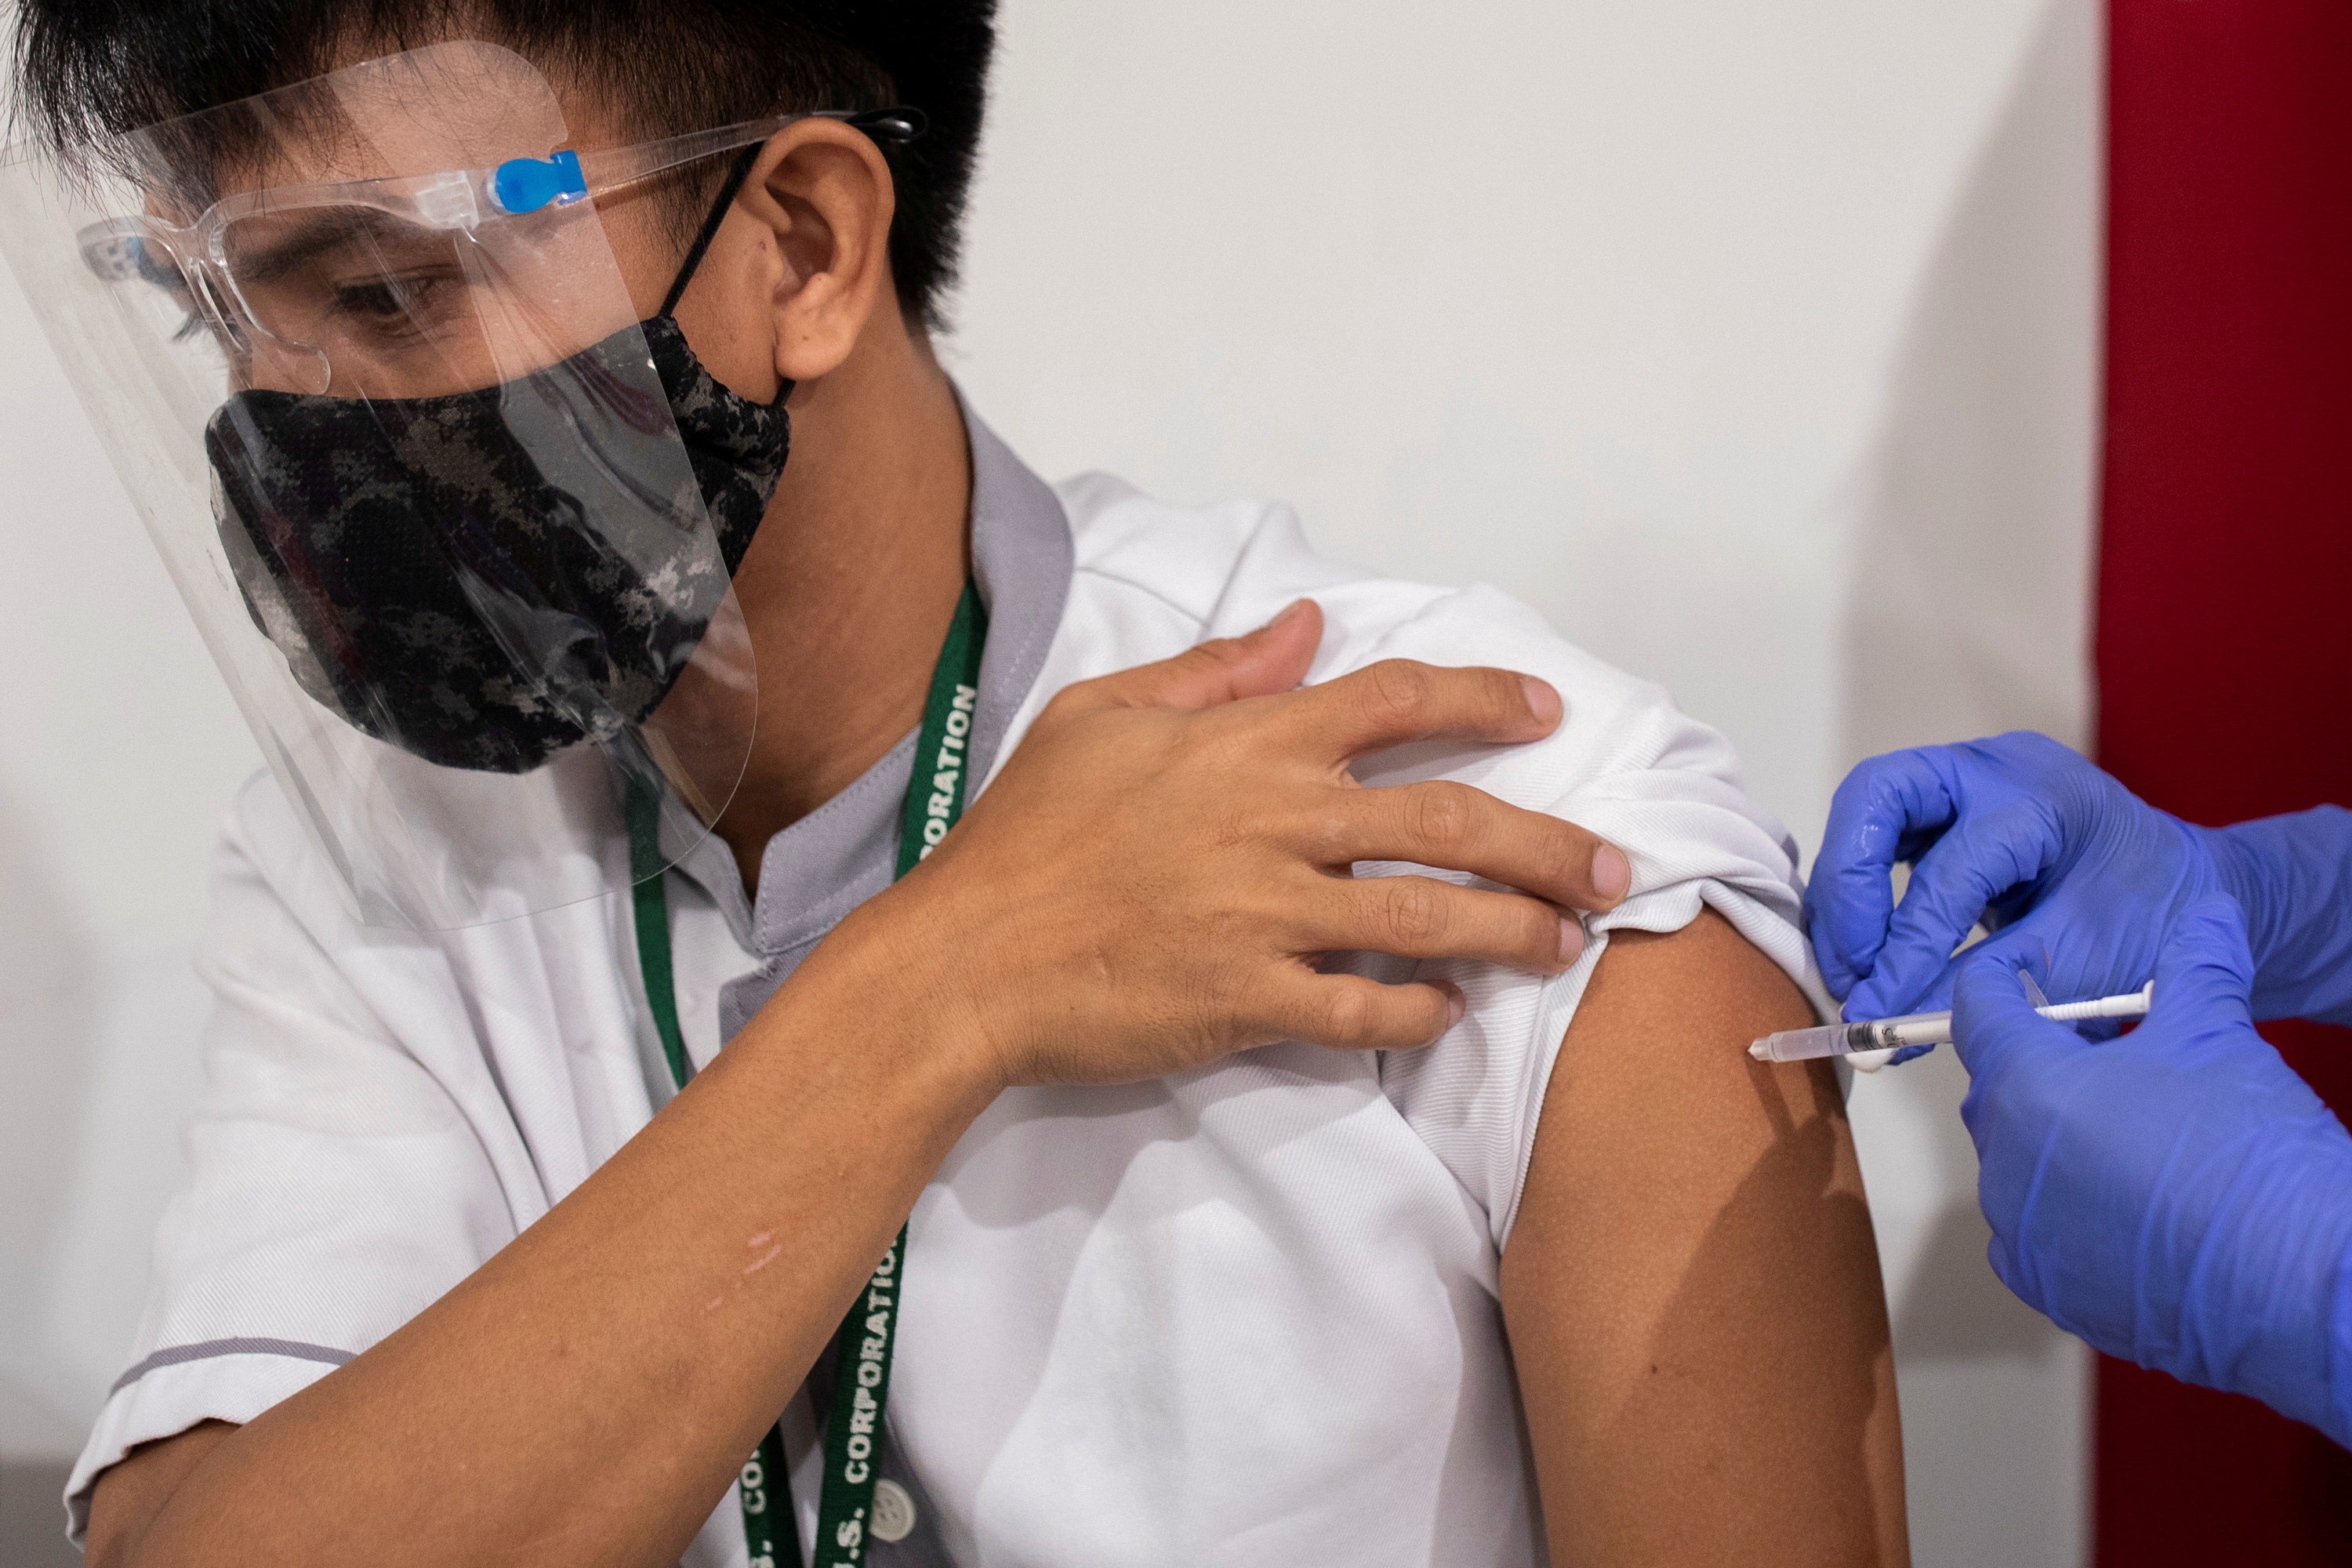 Frederick Obedoza Jr, janitor at a shopping mall, receives a dose of the Russian Sputnik V COVID-19 vaccine as vaccinations start for economic workers, at Robinsons Place, in Manila, Philippines, June 8, 2021. REUTERS/Eloisa Lopez/File Photo